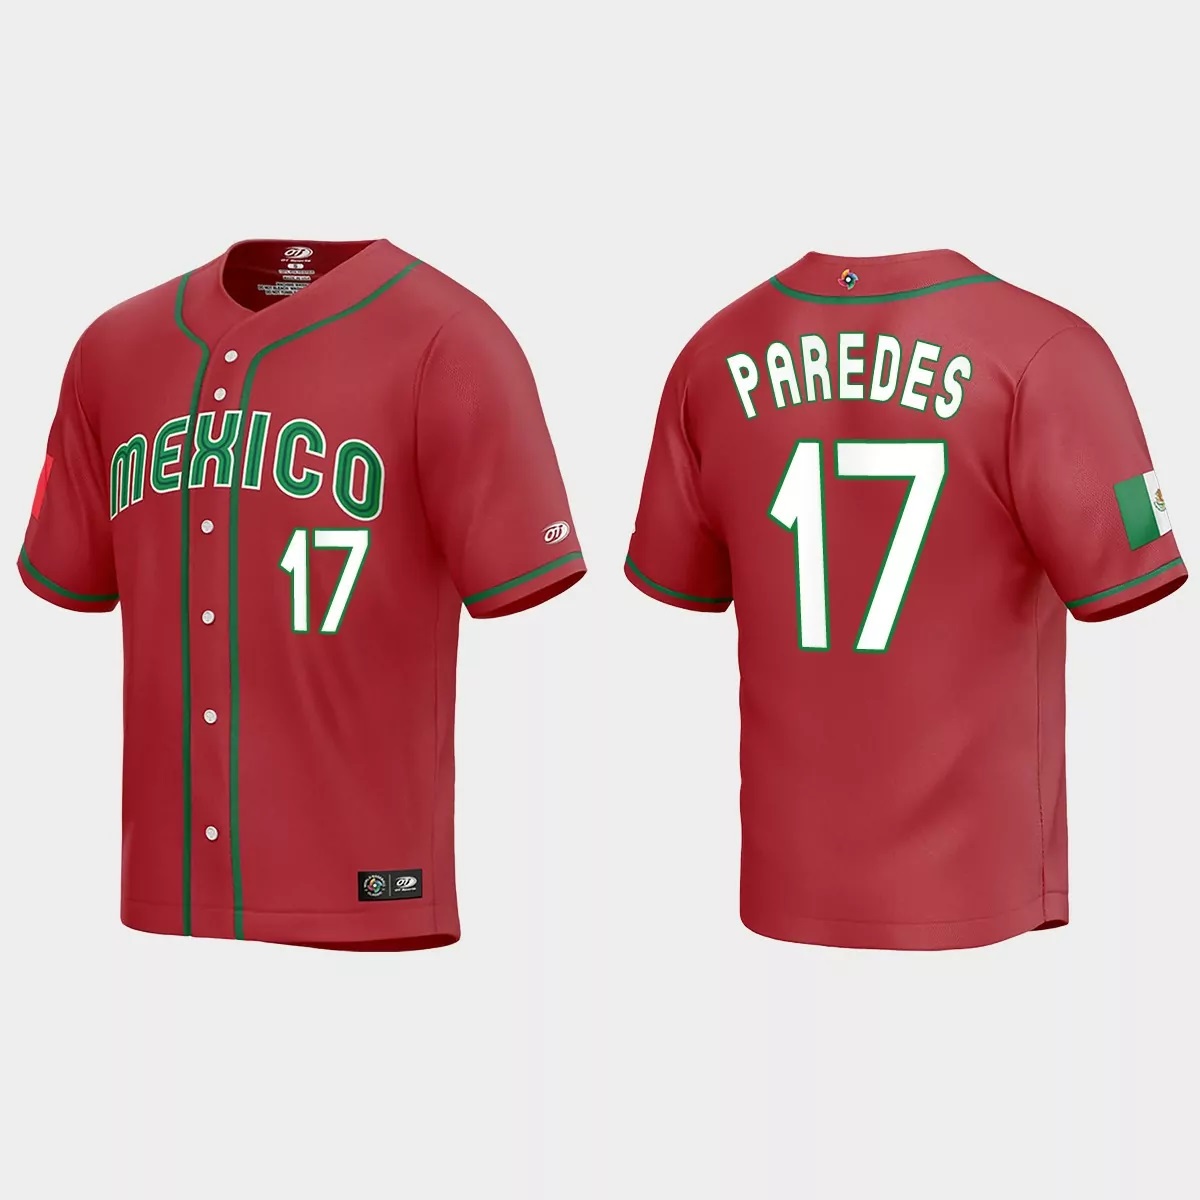 Isaac Paredes Mexico Baseball 2023 World Baseball Classic Replica Jersey – Red